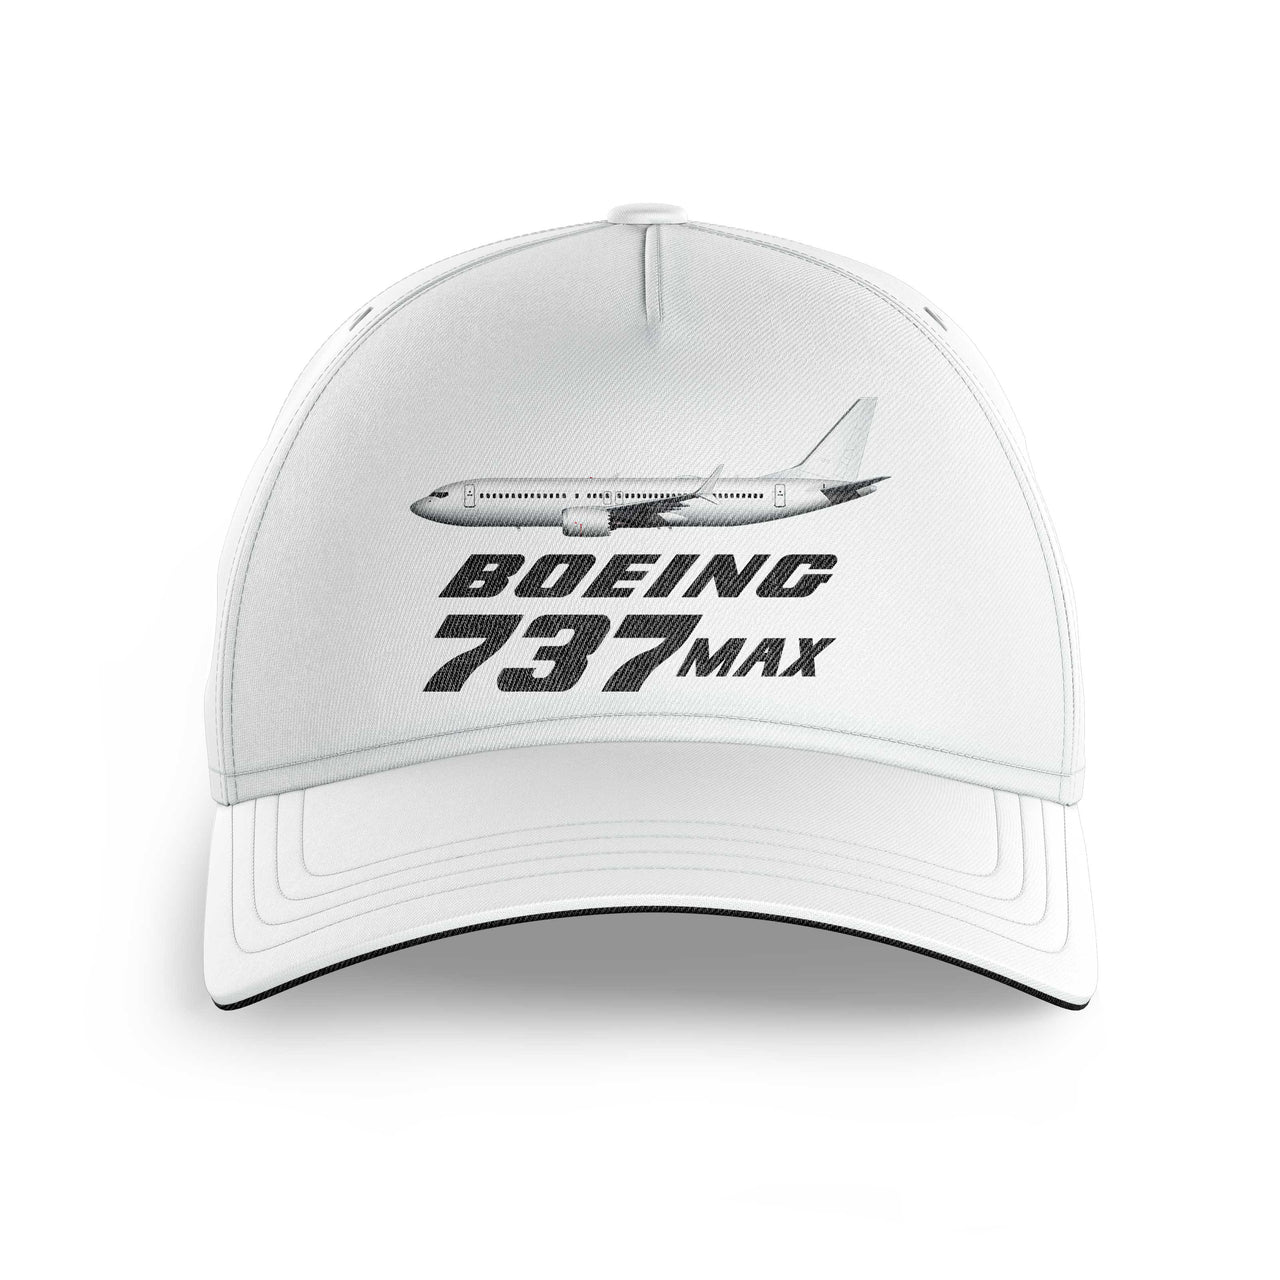 The Boeing 737Max Printed Hats